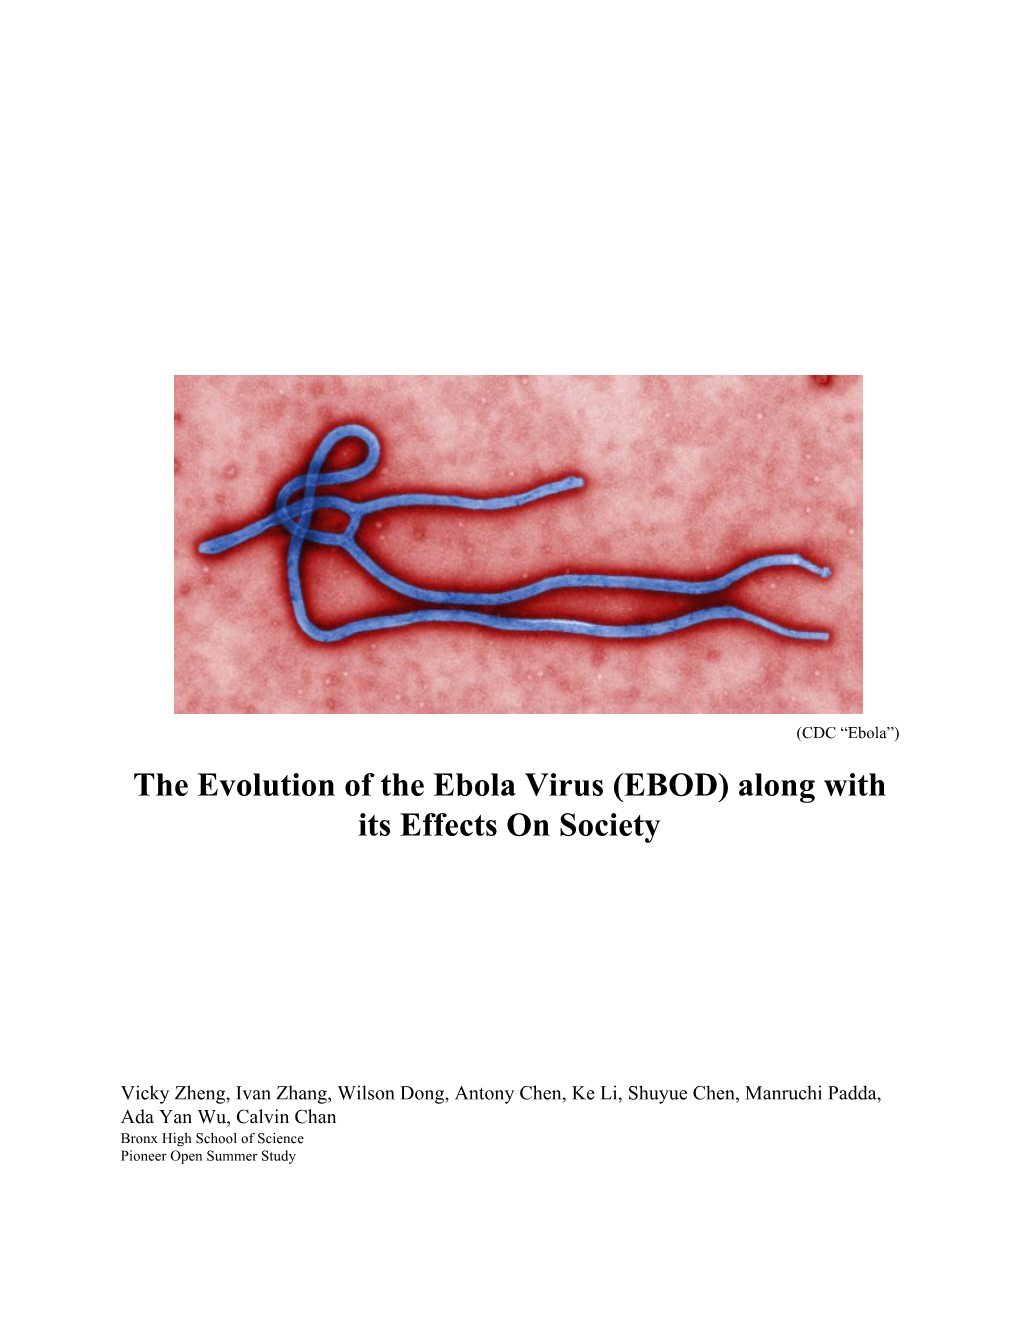 The Evolution of the Ebola Virus (EBOD) Along with Its Effects on Society